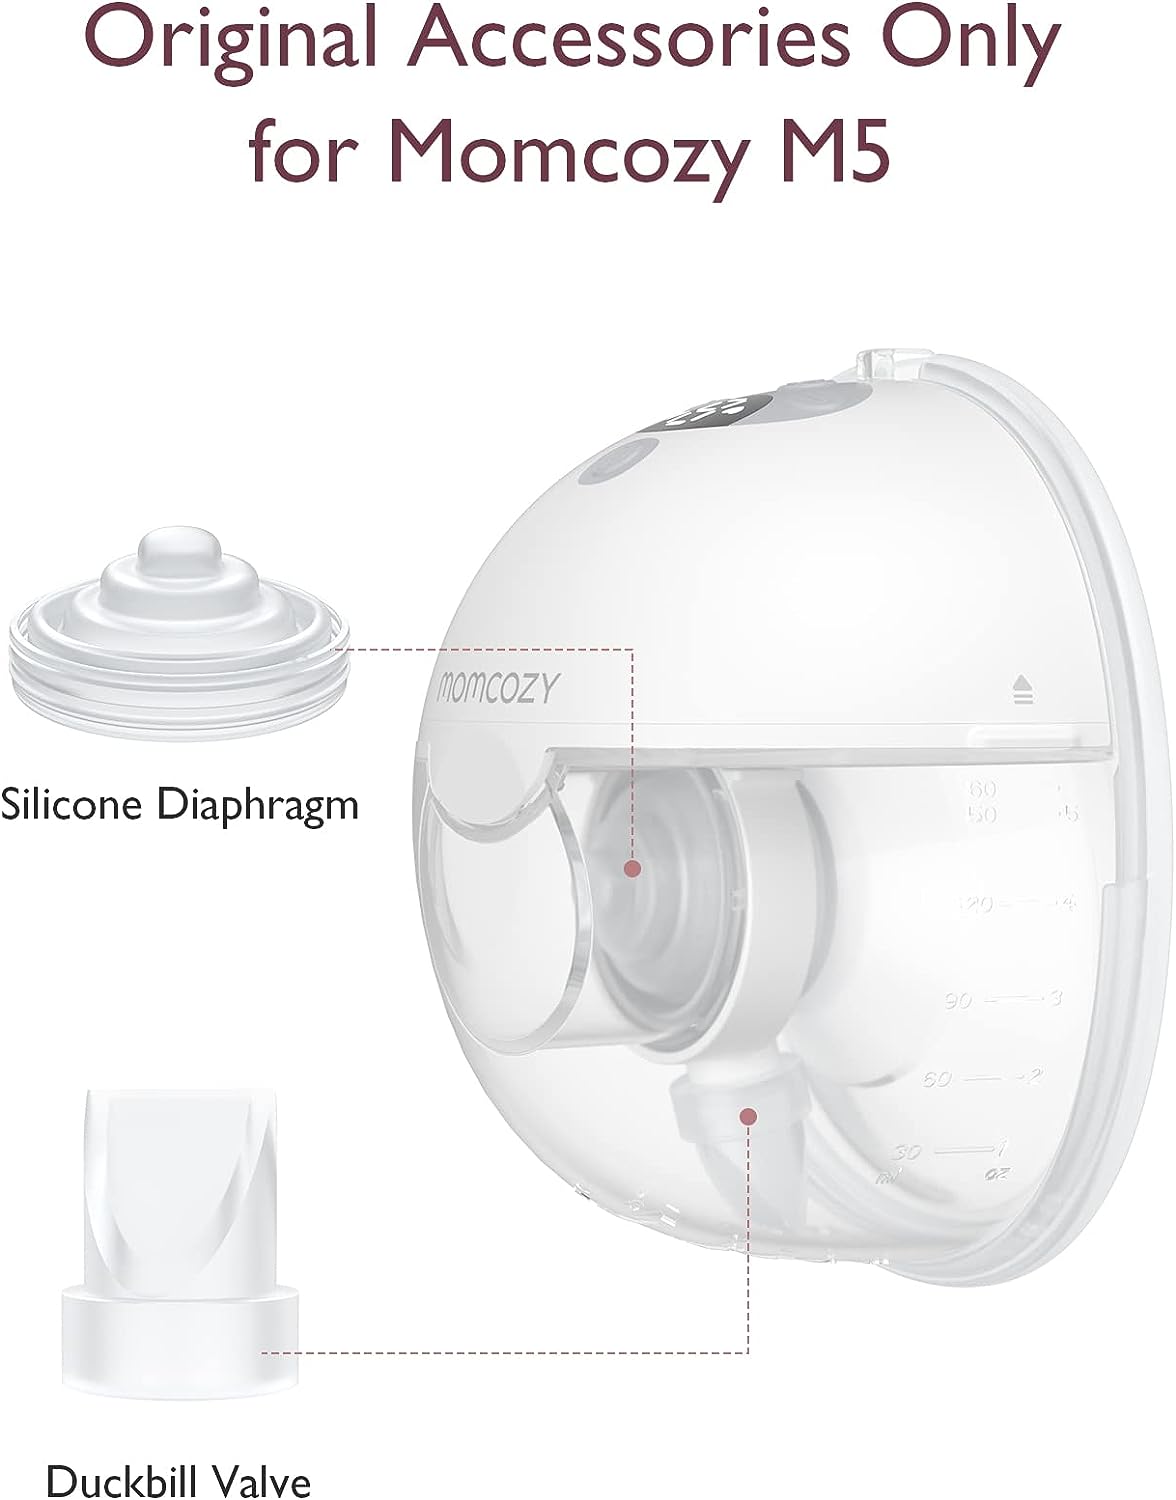 Momcozy Duckbill Valves & Silicone Diaphragm Compatible with Momcozy M5.